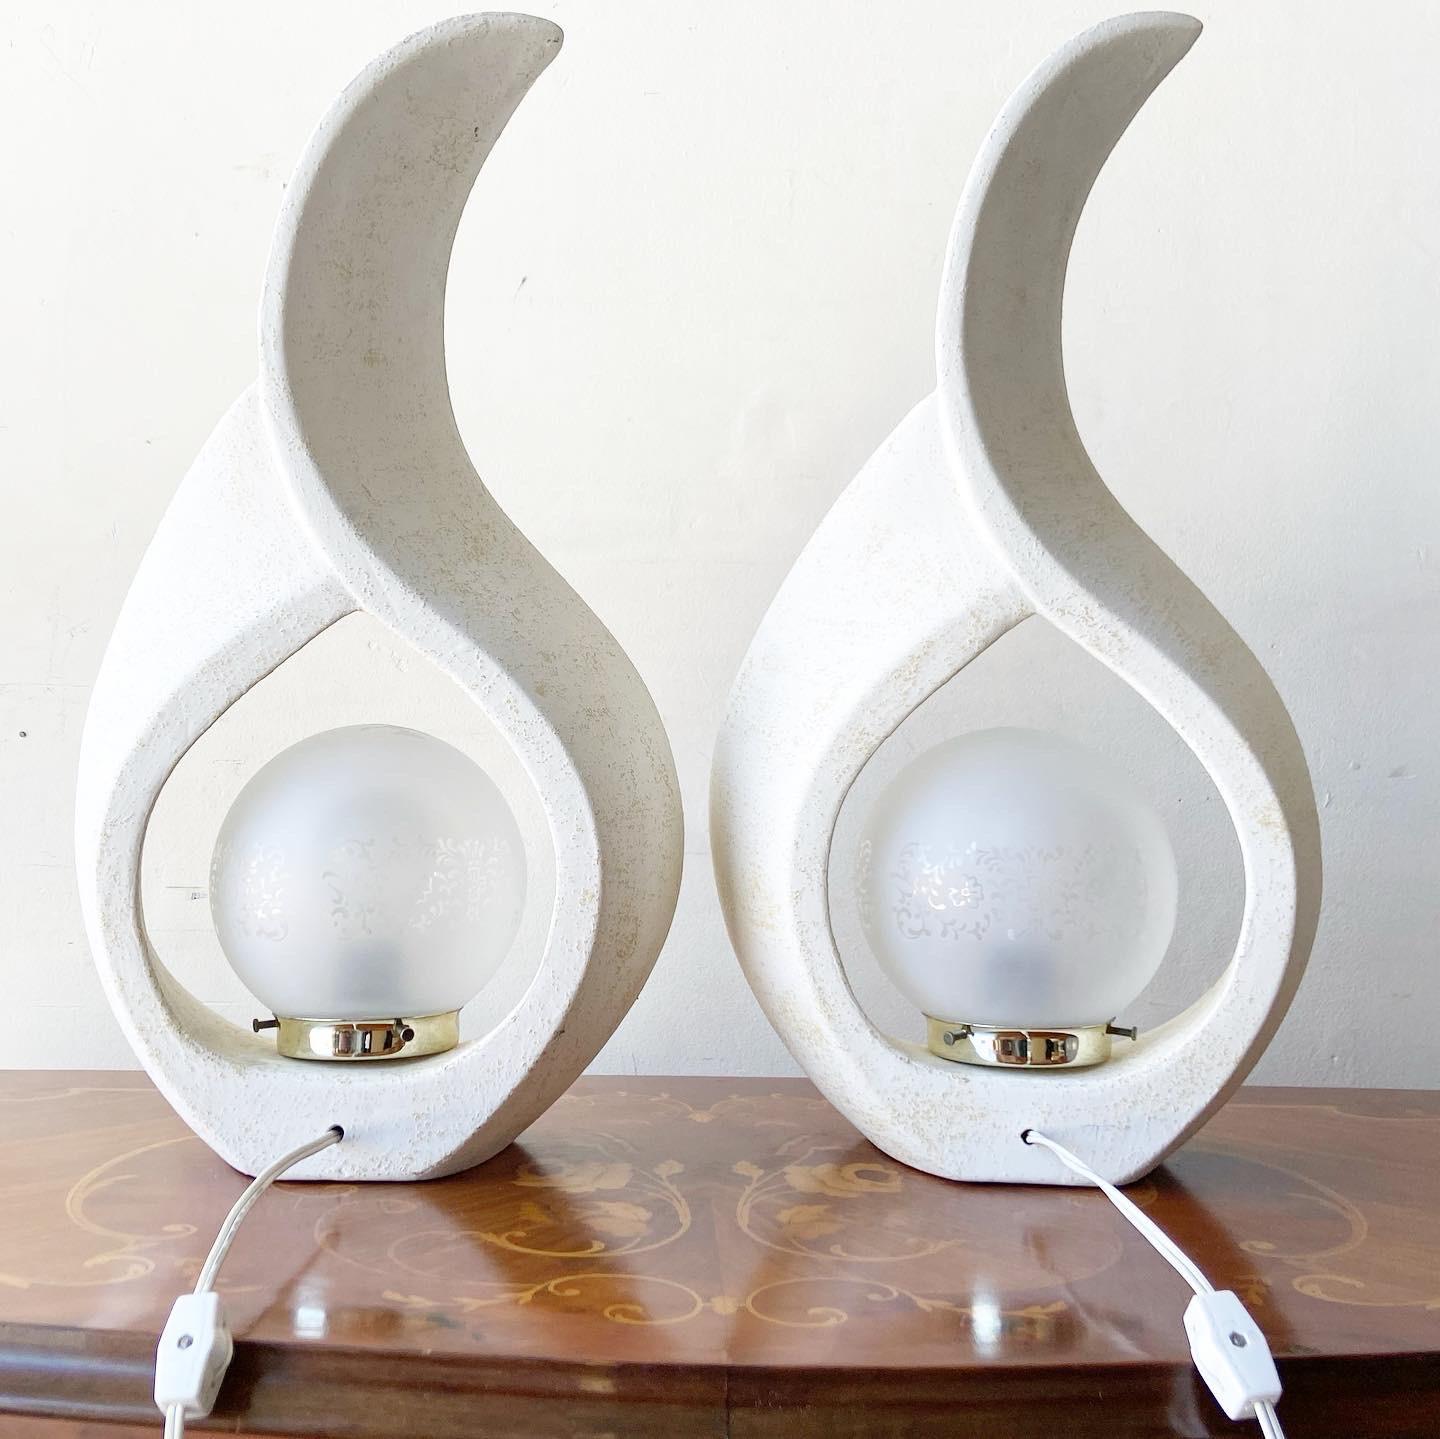 Incredible pair of postmodern sculptural flame lamps. Each feature a distressed white over the rough ceramic texture. The frosted glass spherical lamp shade displays an etched floral pattern.